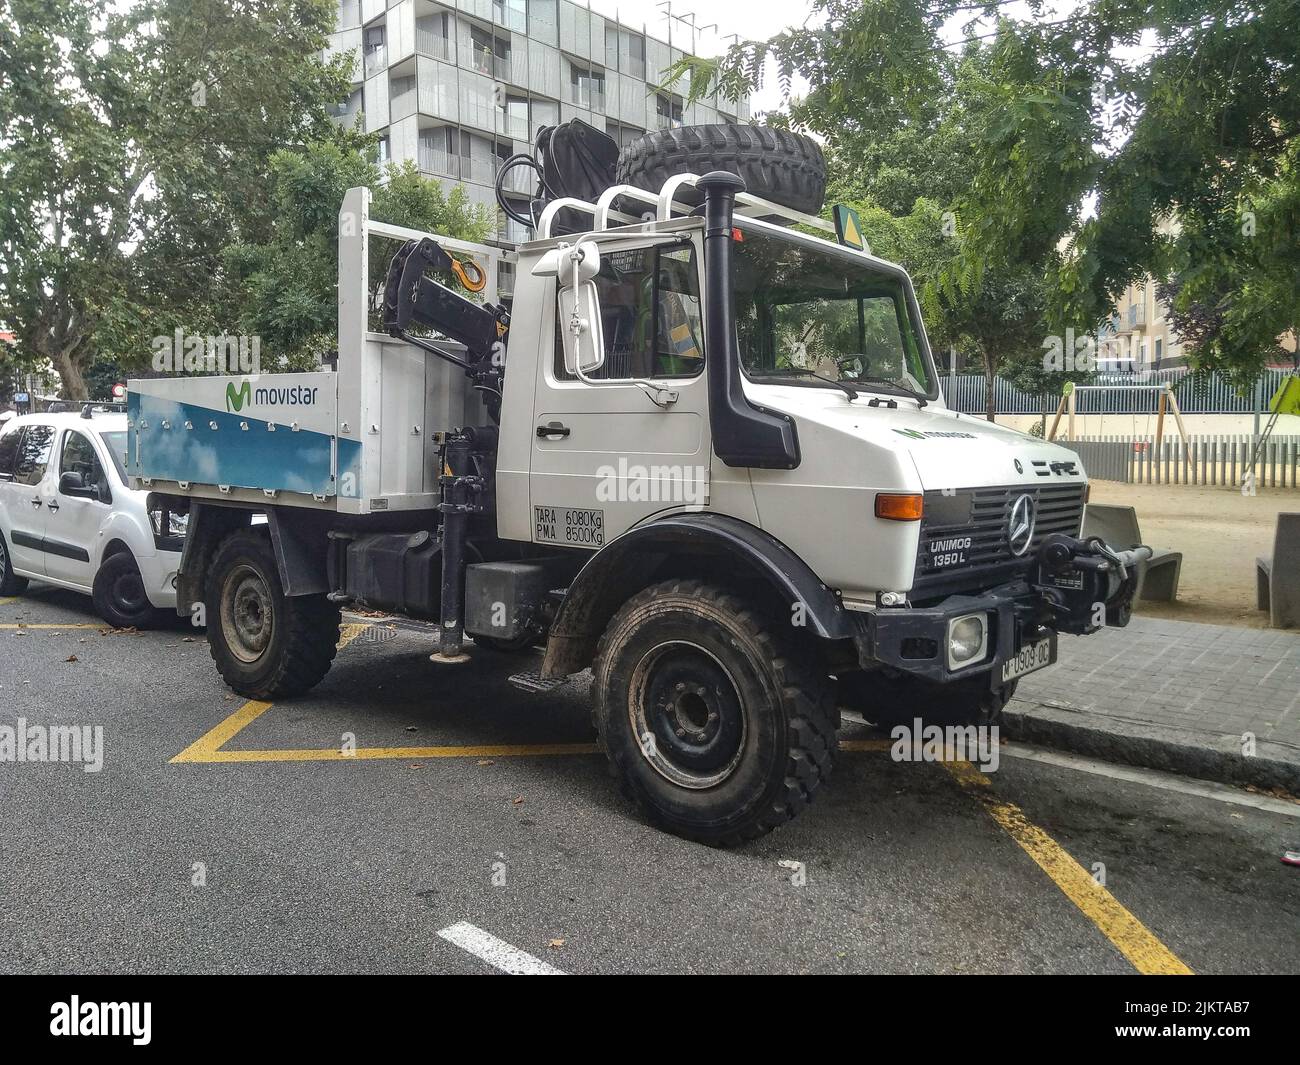 Big off road truck with crane parked in the city. The truck is color white Mercedes Benz Unimog of Movistar Telefonica company Stock Photo